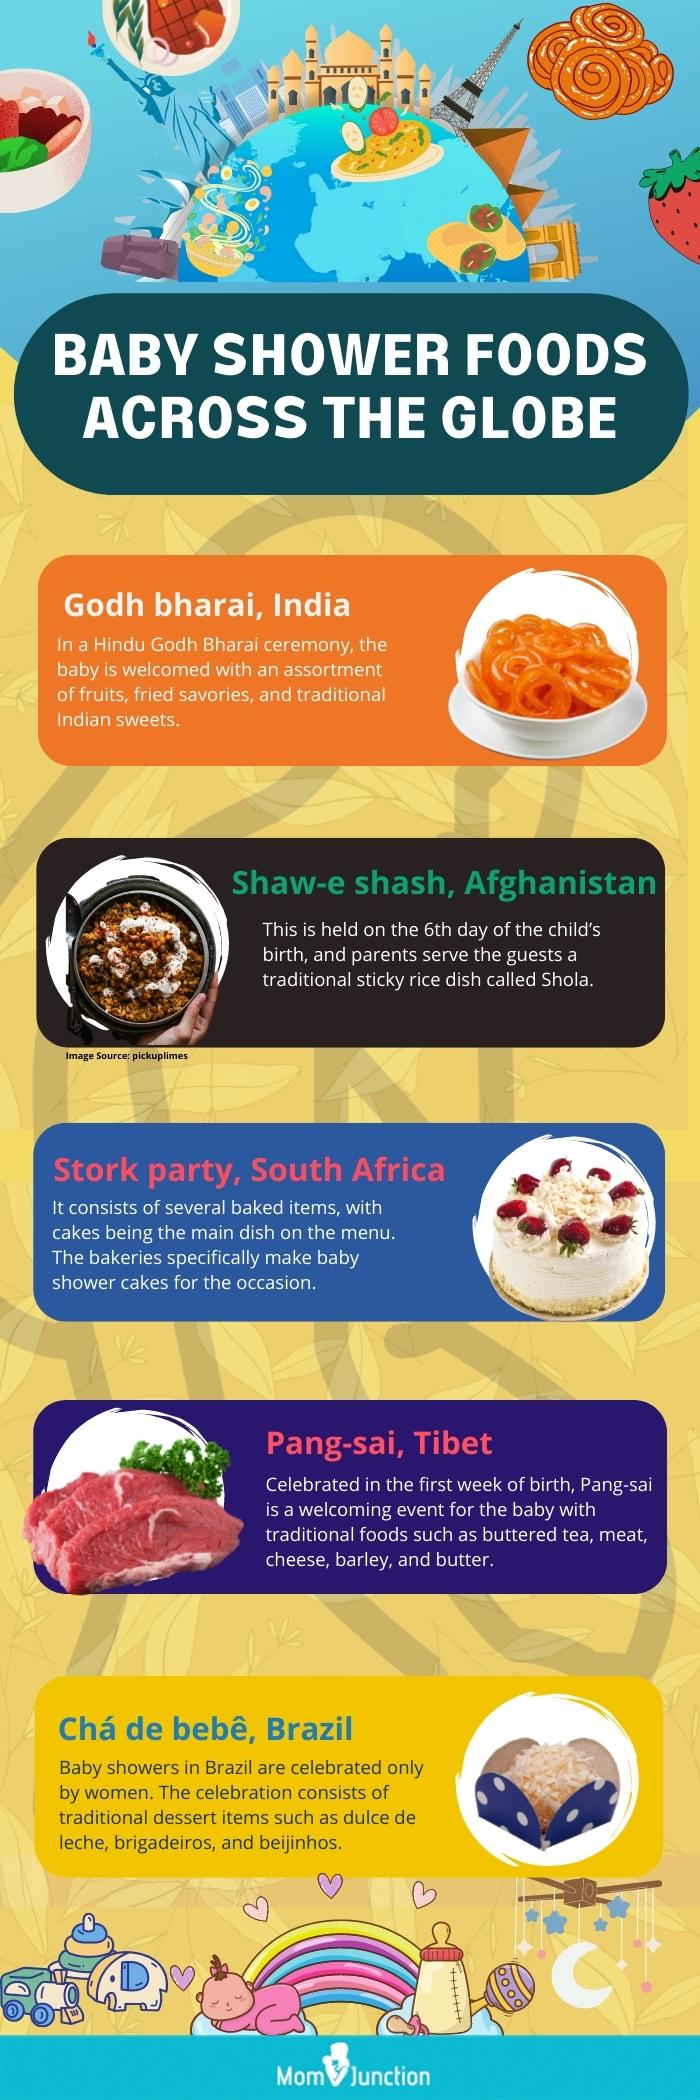 baby shower foods [infographic]